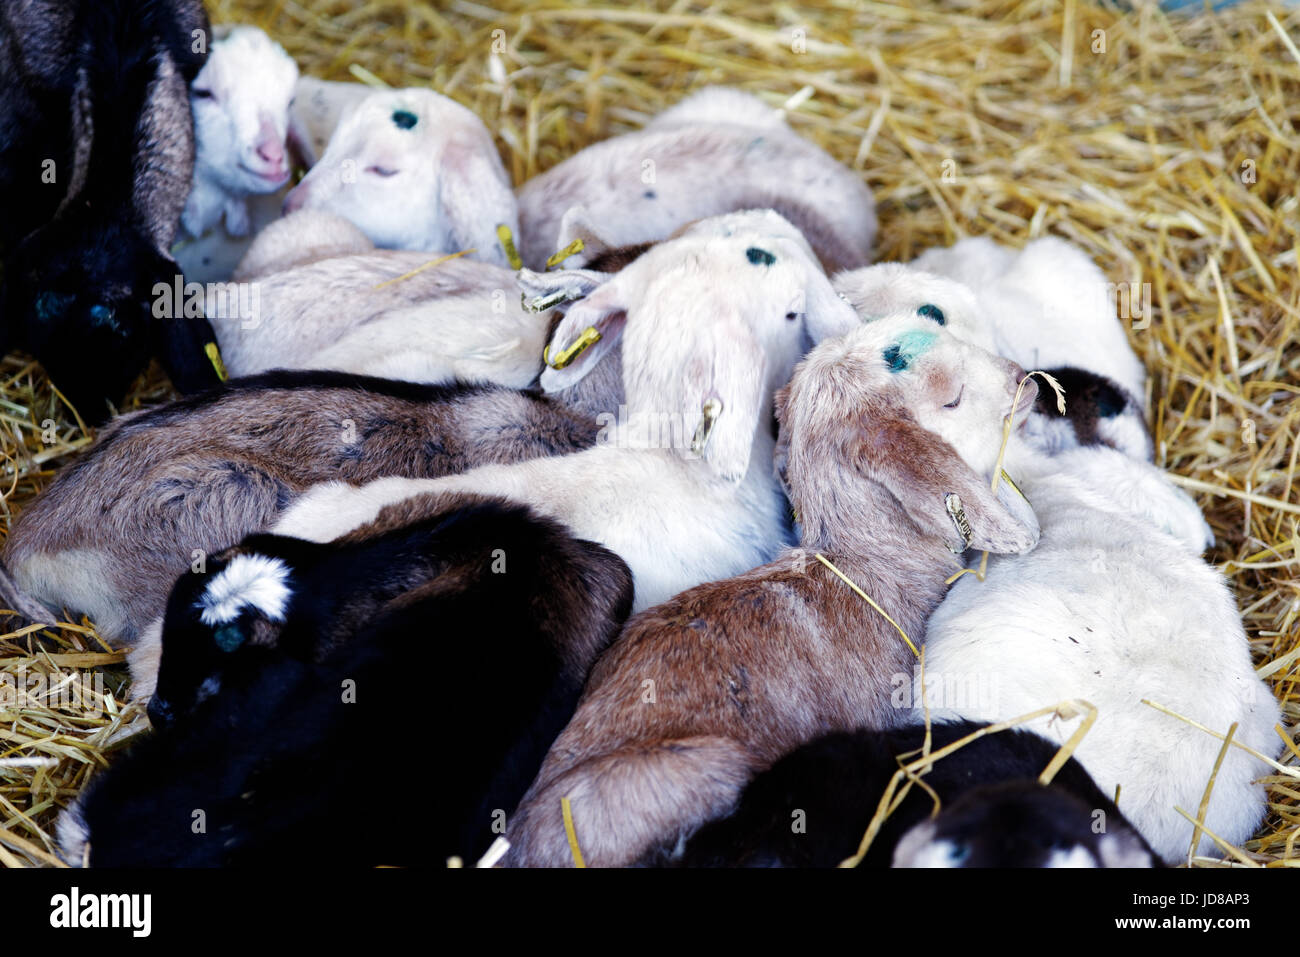 Baby goats all huddled together Stock Photo